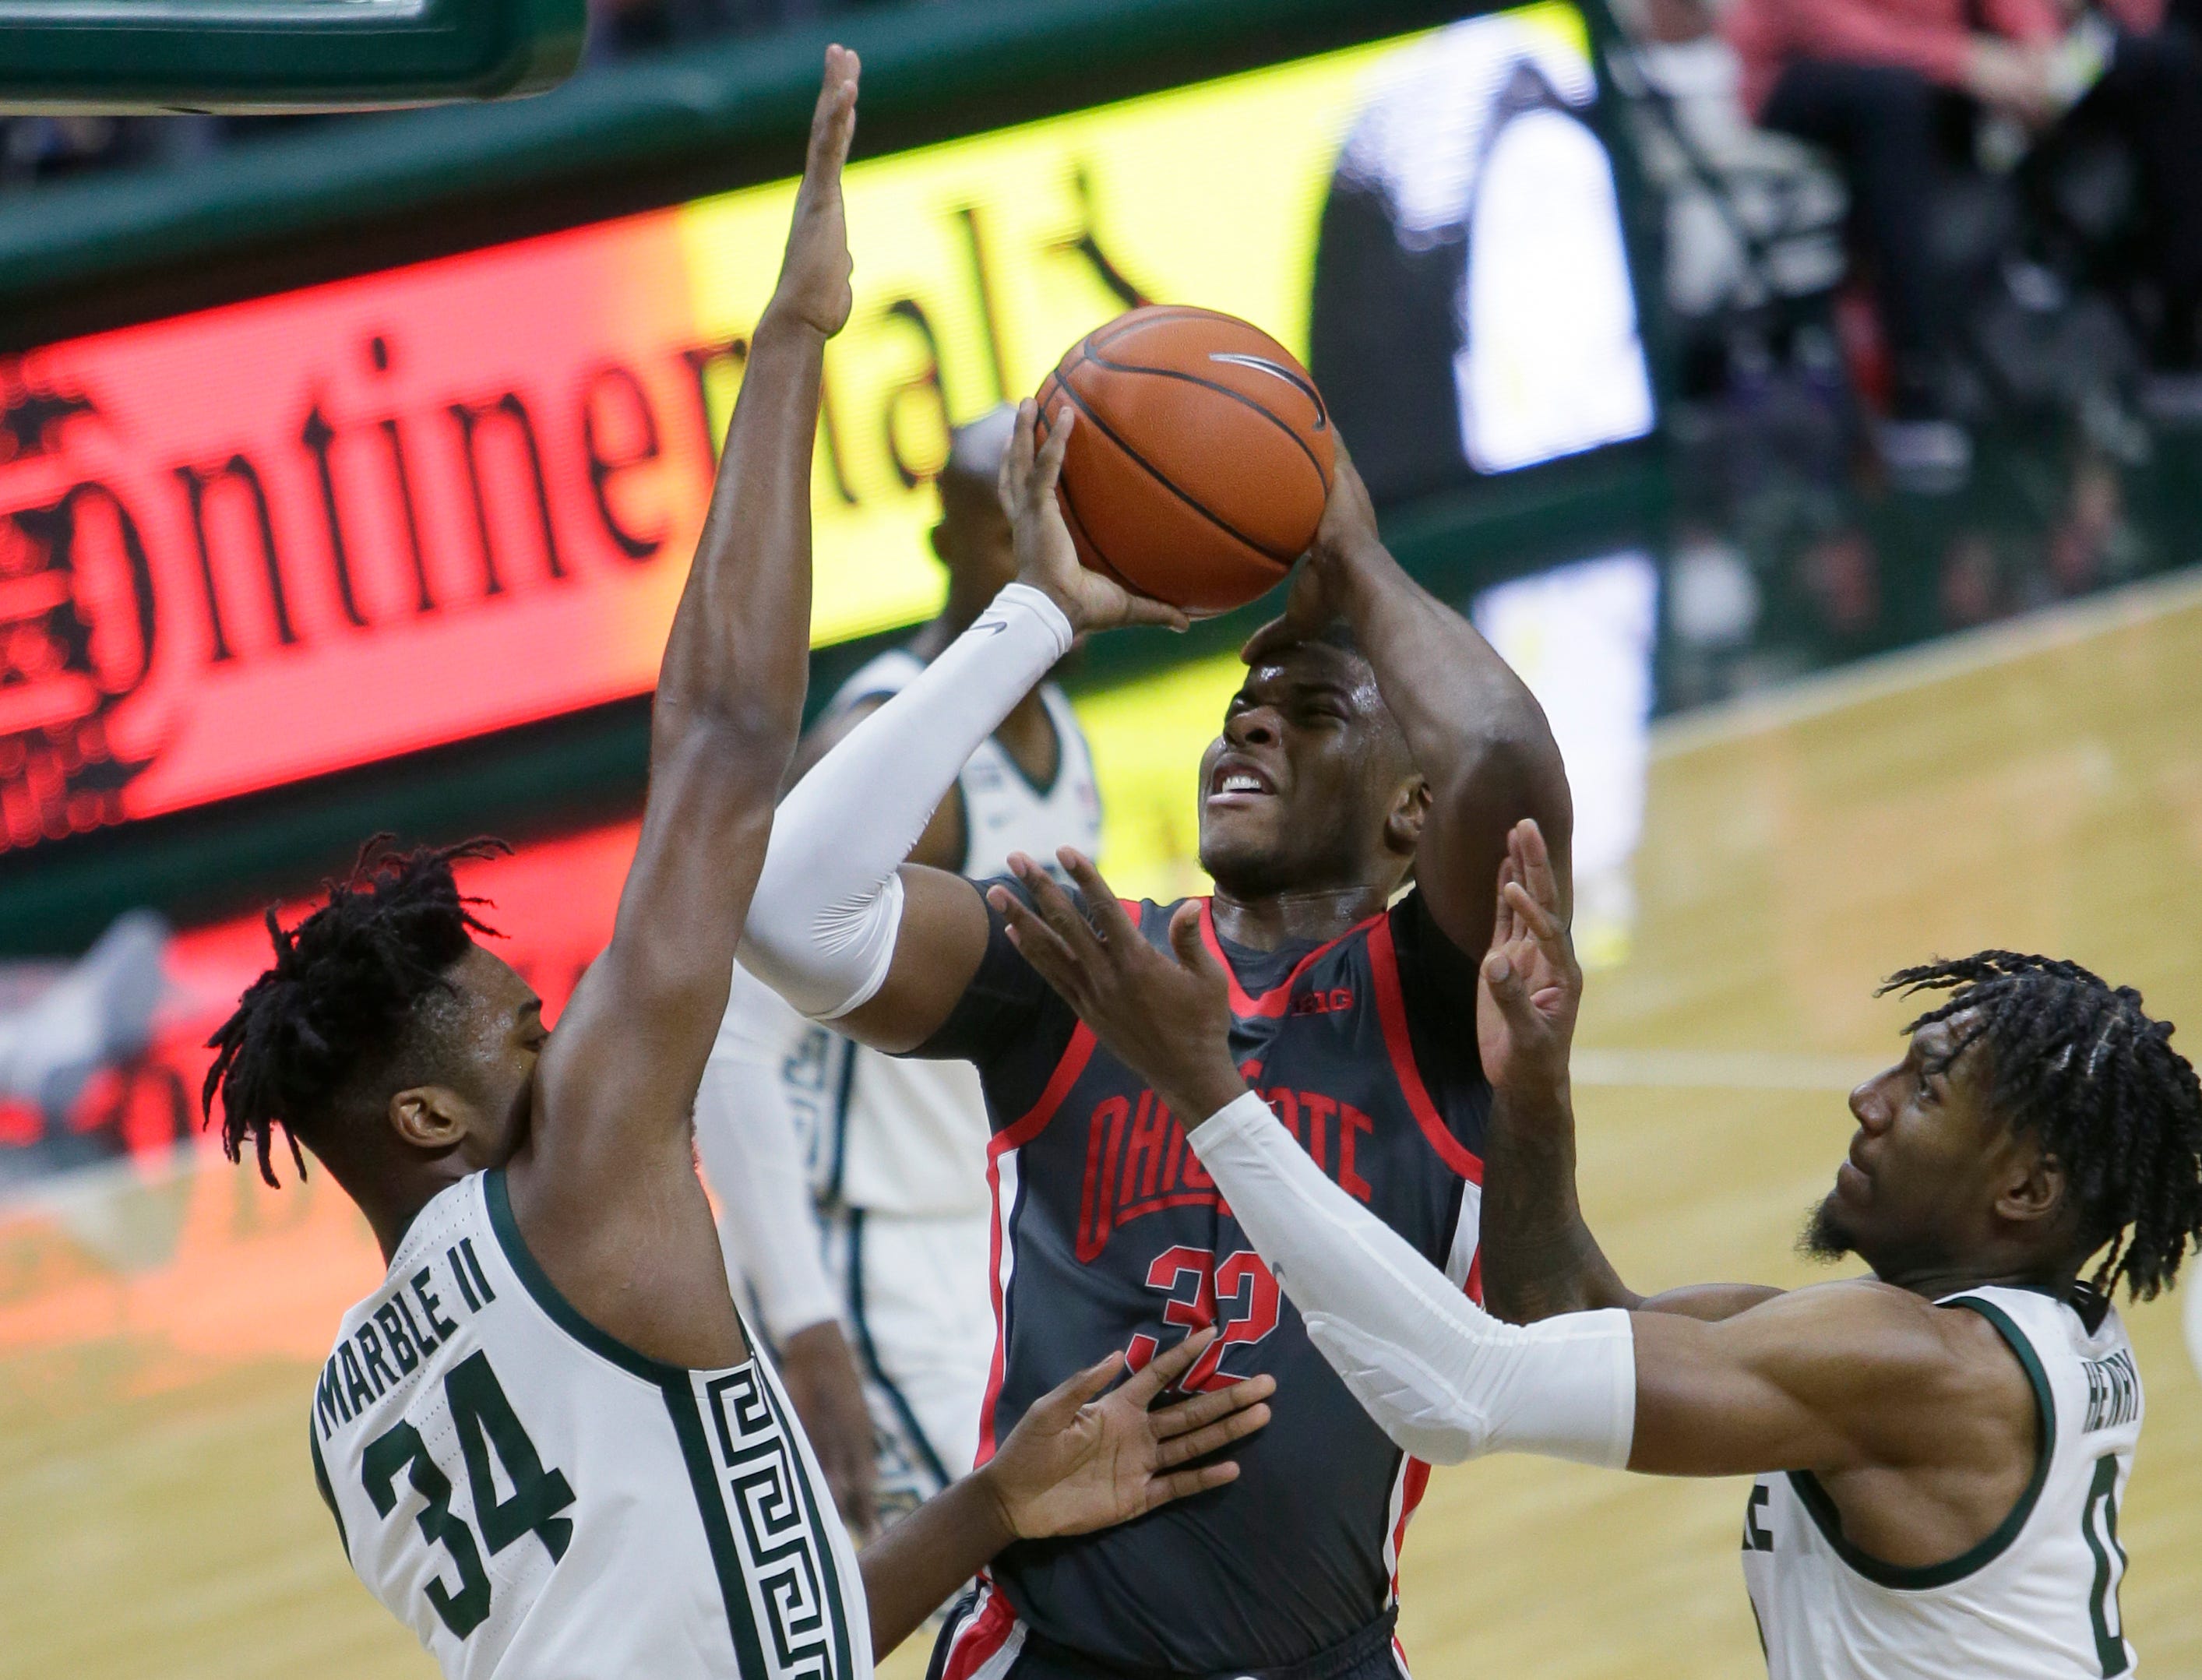 Ohio State forward E.J. Liddell (32) shoots against Michigan State forwards Julius Marble II (34) and Aaron Henry, right, during the first half of an NCAA college basketball game Thursday, Feb. 25, 2021, in East Lansing, Mich.